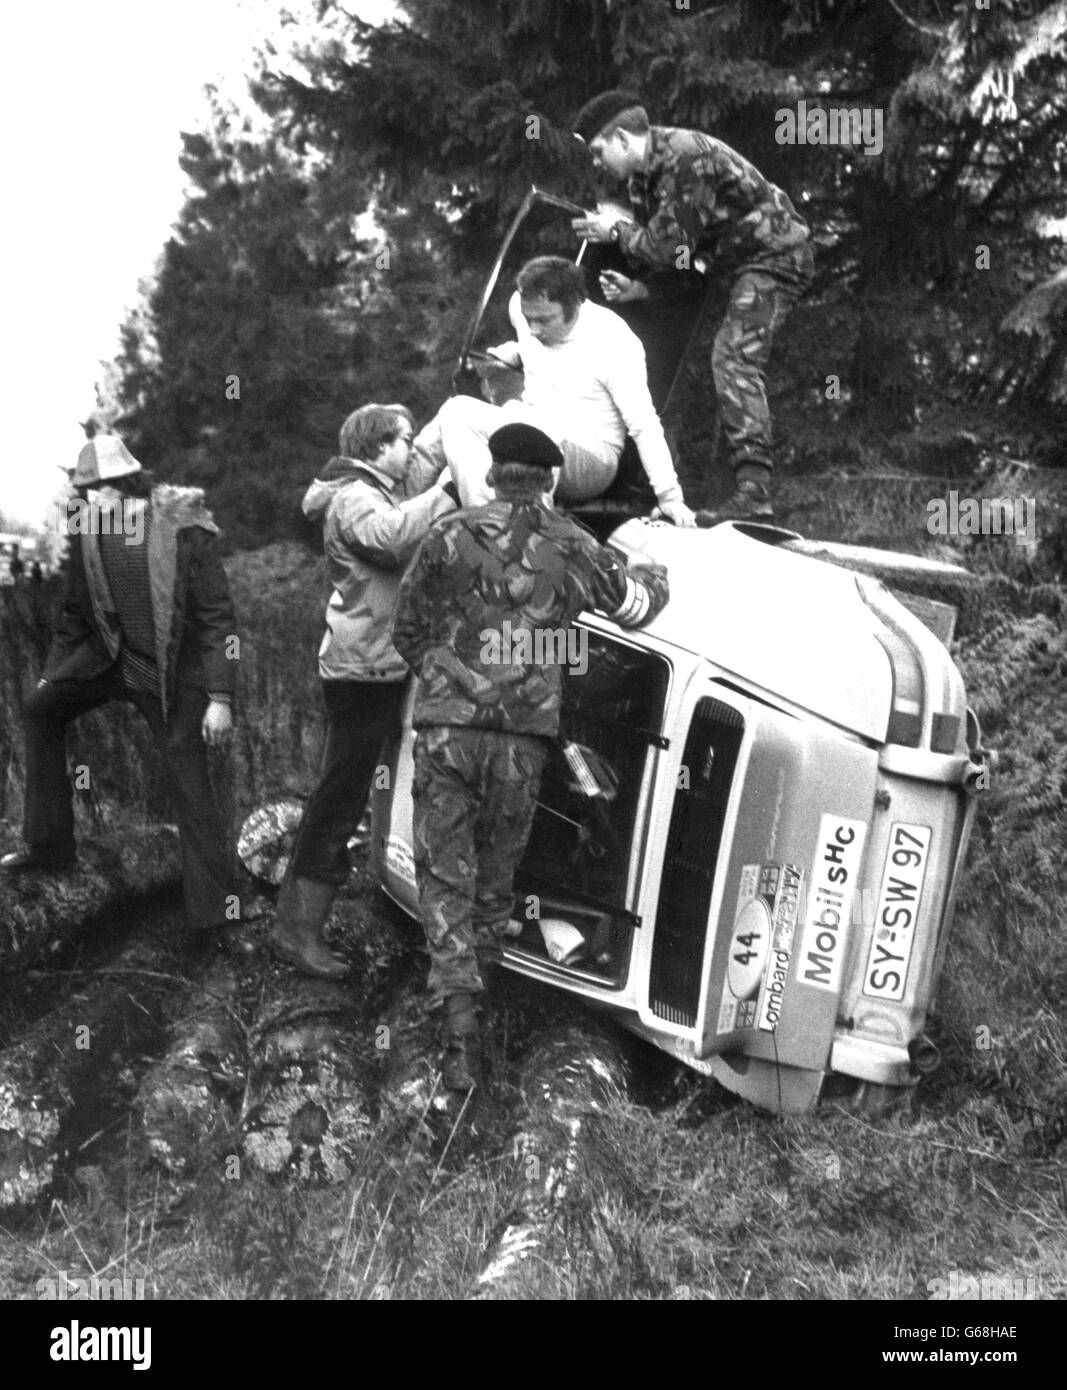 Rally drivers abandon their crashed their Porsche 911SC on a tight bend in the Forest of Dean during the Second stage of the RAC Round-Britain rally. The car was driven by West German driver Heinz-Walter Schewe and his co-driver Franz-Josef Moormann, who escaped with no injuries. Two spectators were seriously injured and several others hurt, causing the stage to be abandoned and competitors moved on to Stage three. Stock Photo